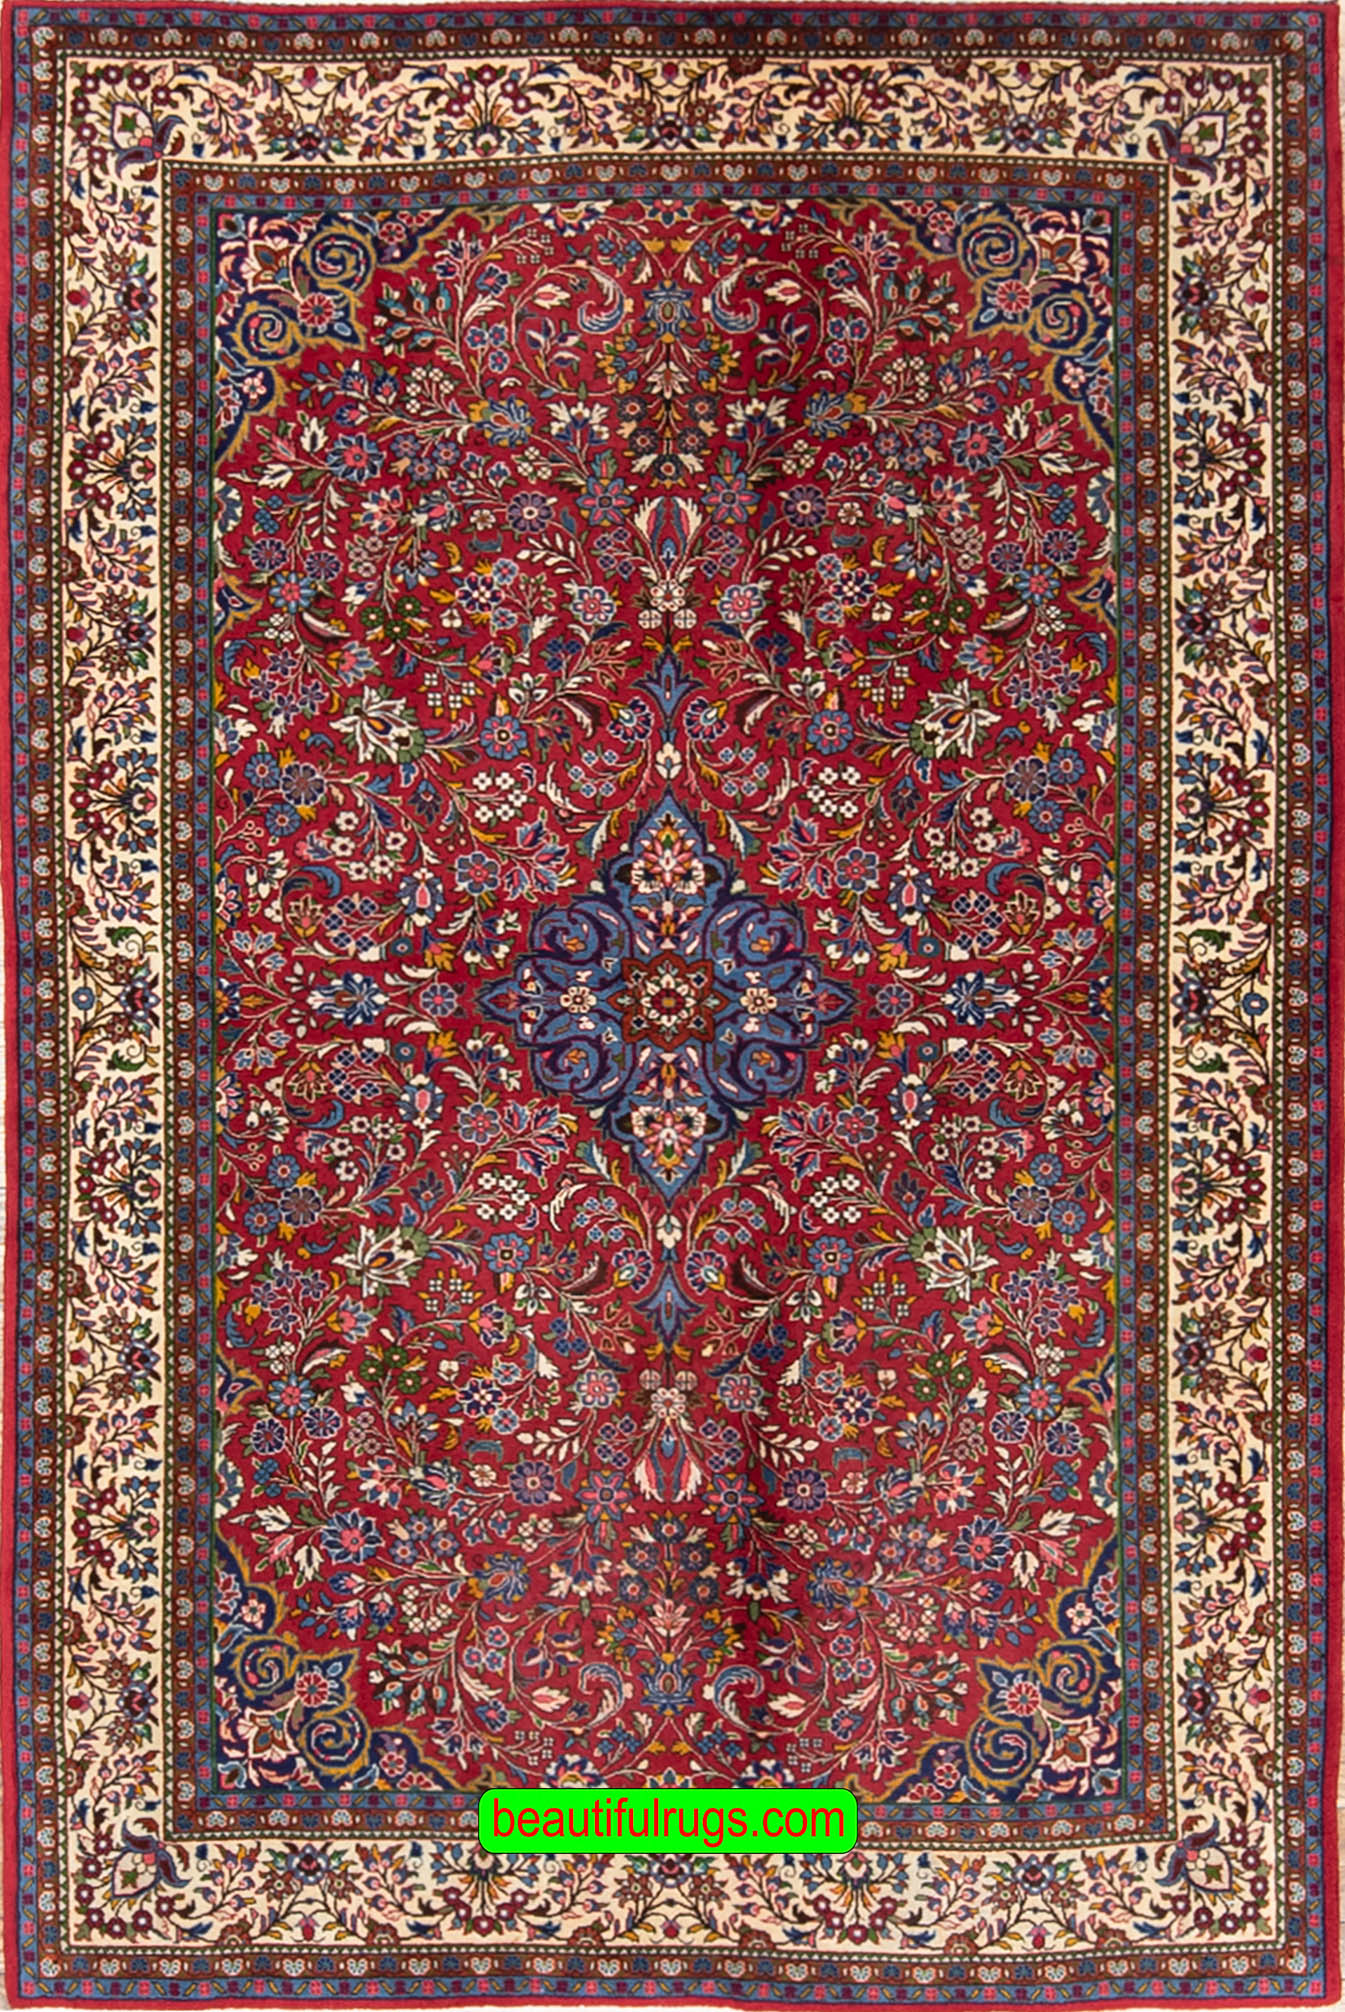 Handmade floral Persian Sarouk wool rug in red and beige colors. Size 4.3x6.9.